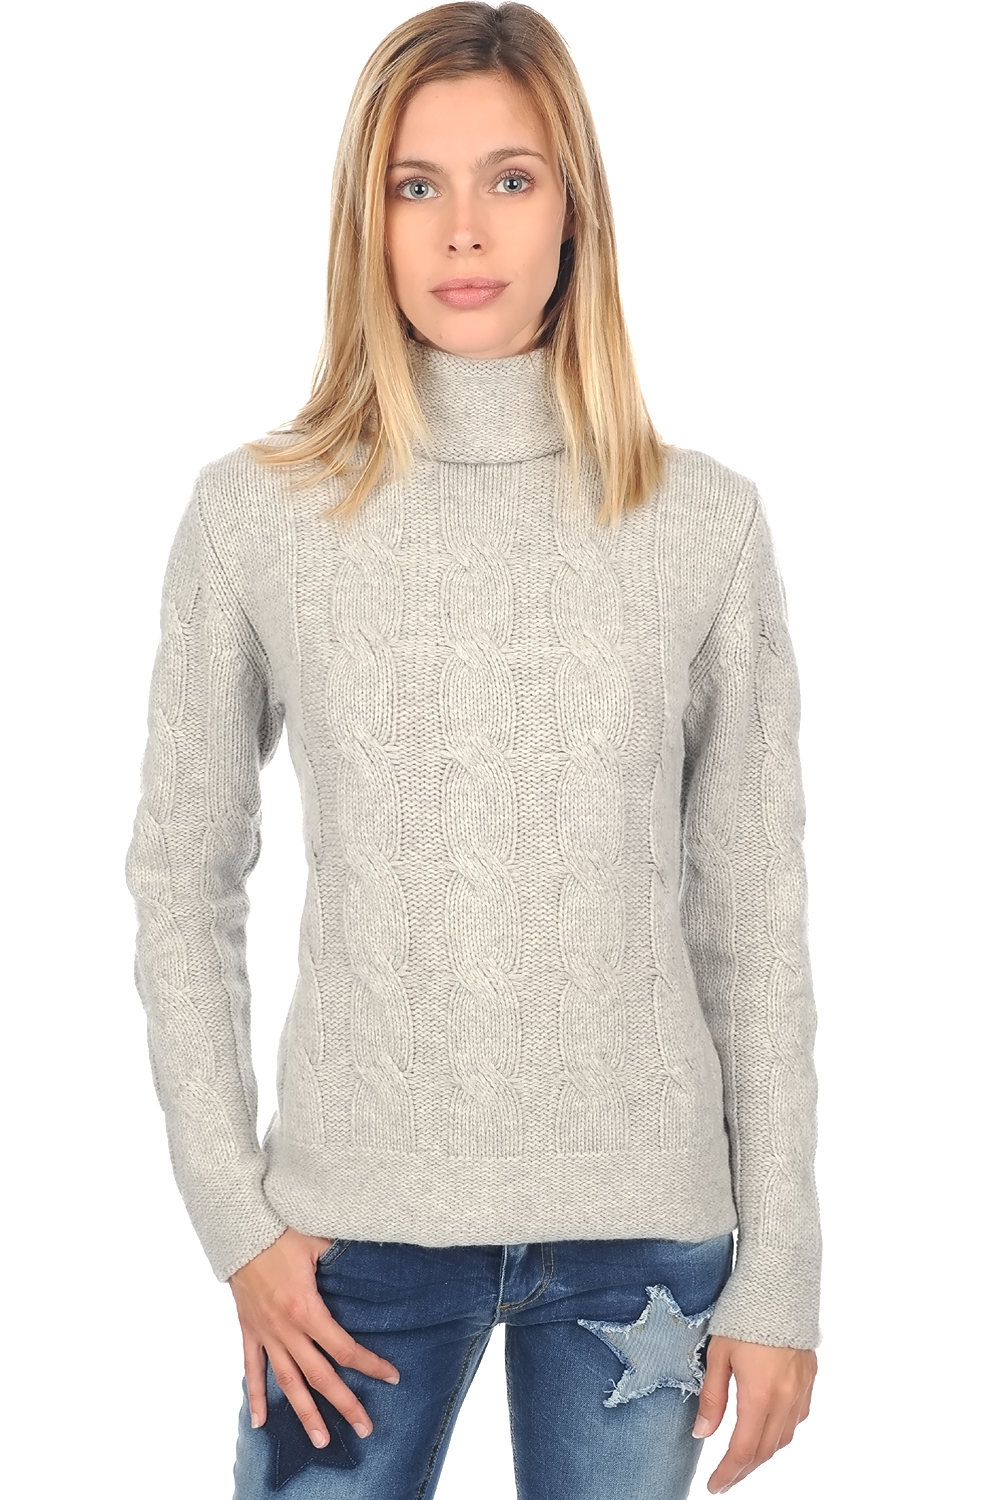 Cashmere ladies chunky sweater blanche flanelle chine 4xl